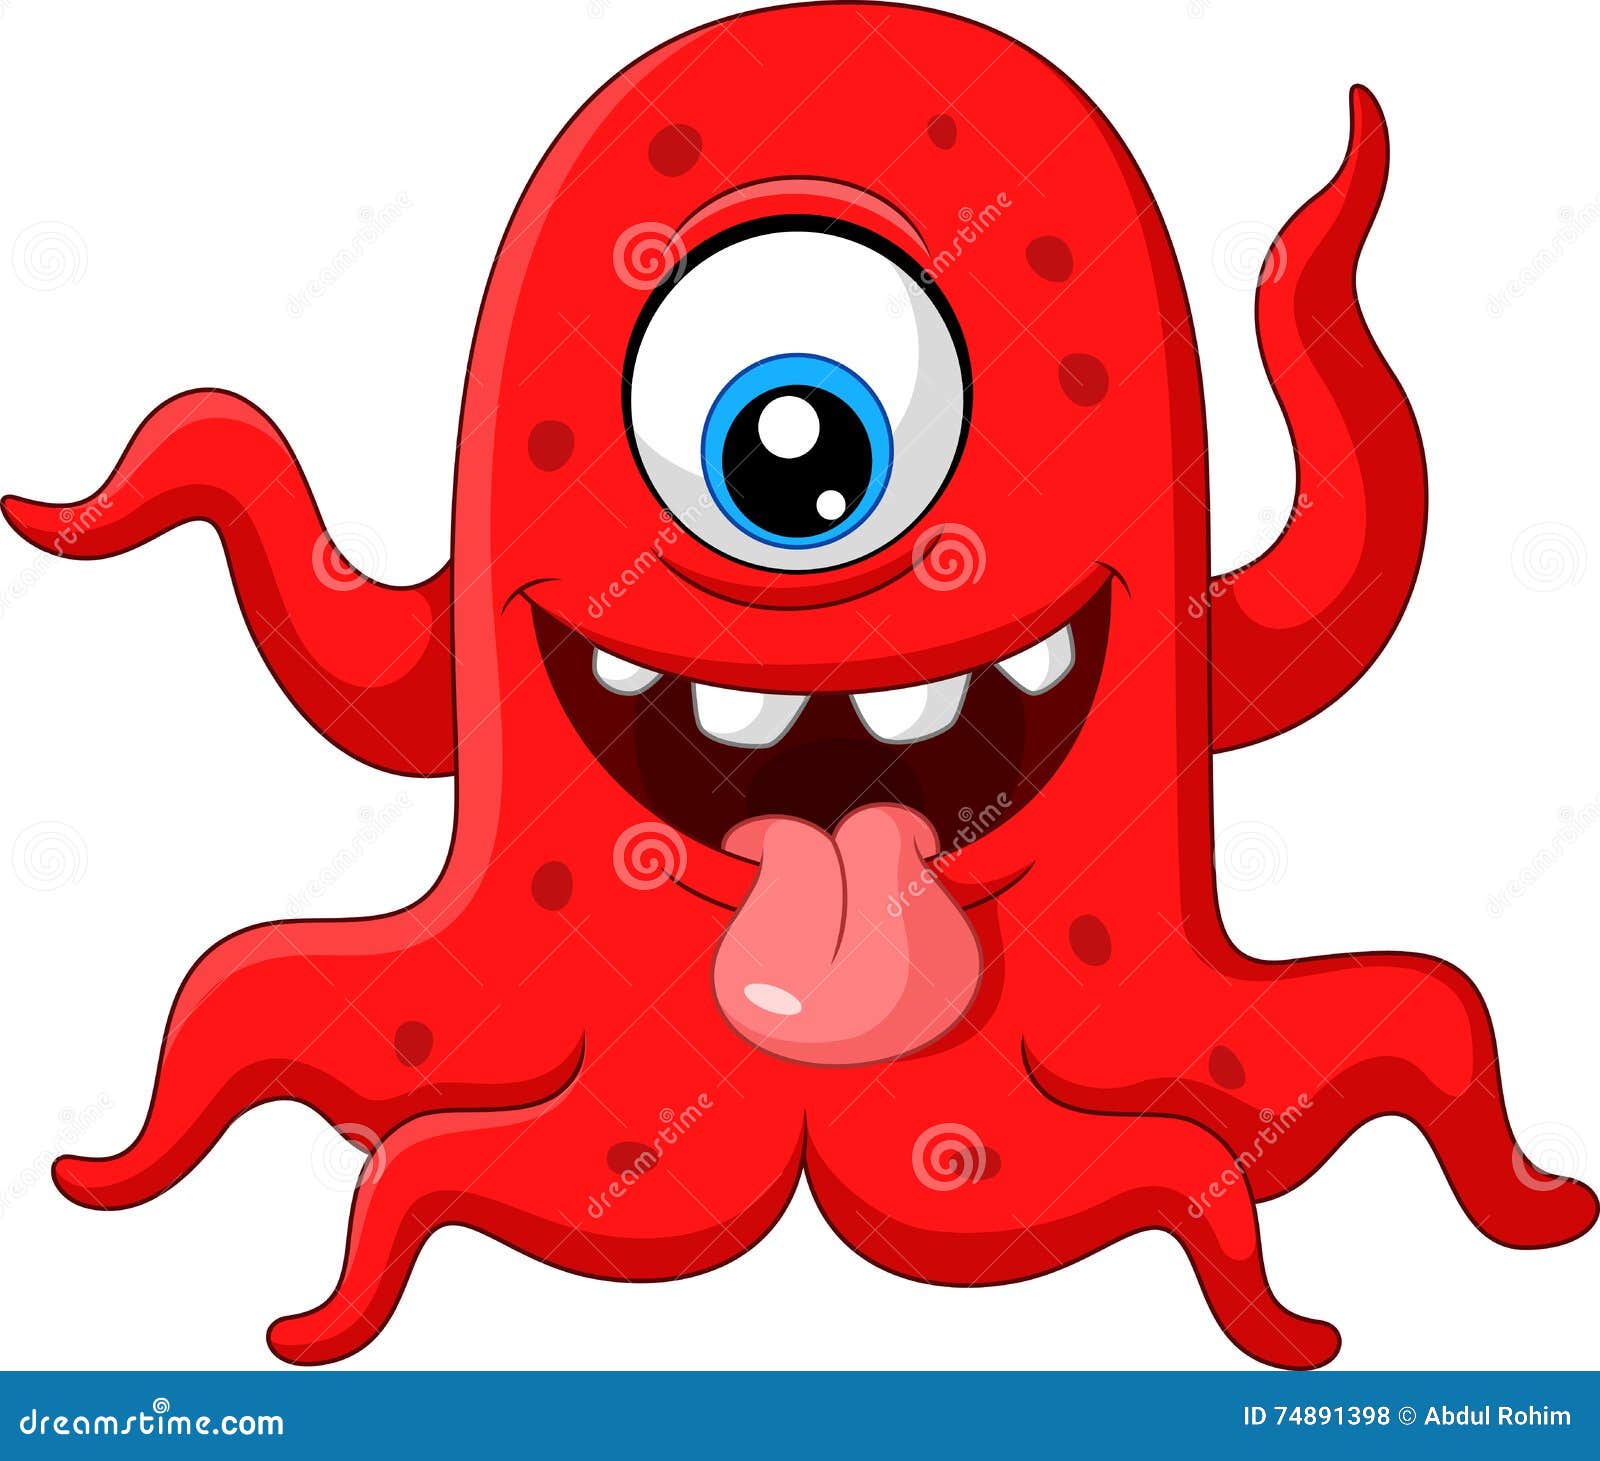 Cartoon funny red monster stock vector. Illustration of drawing - 74891398